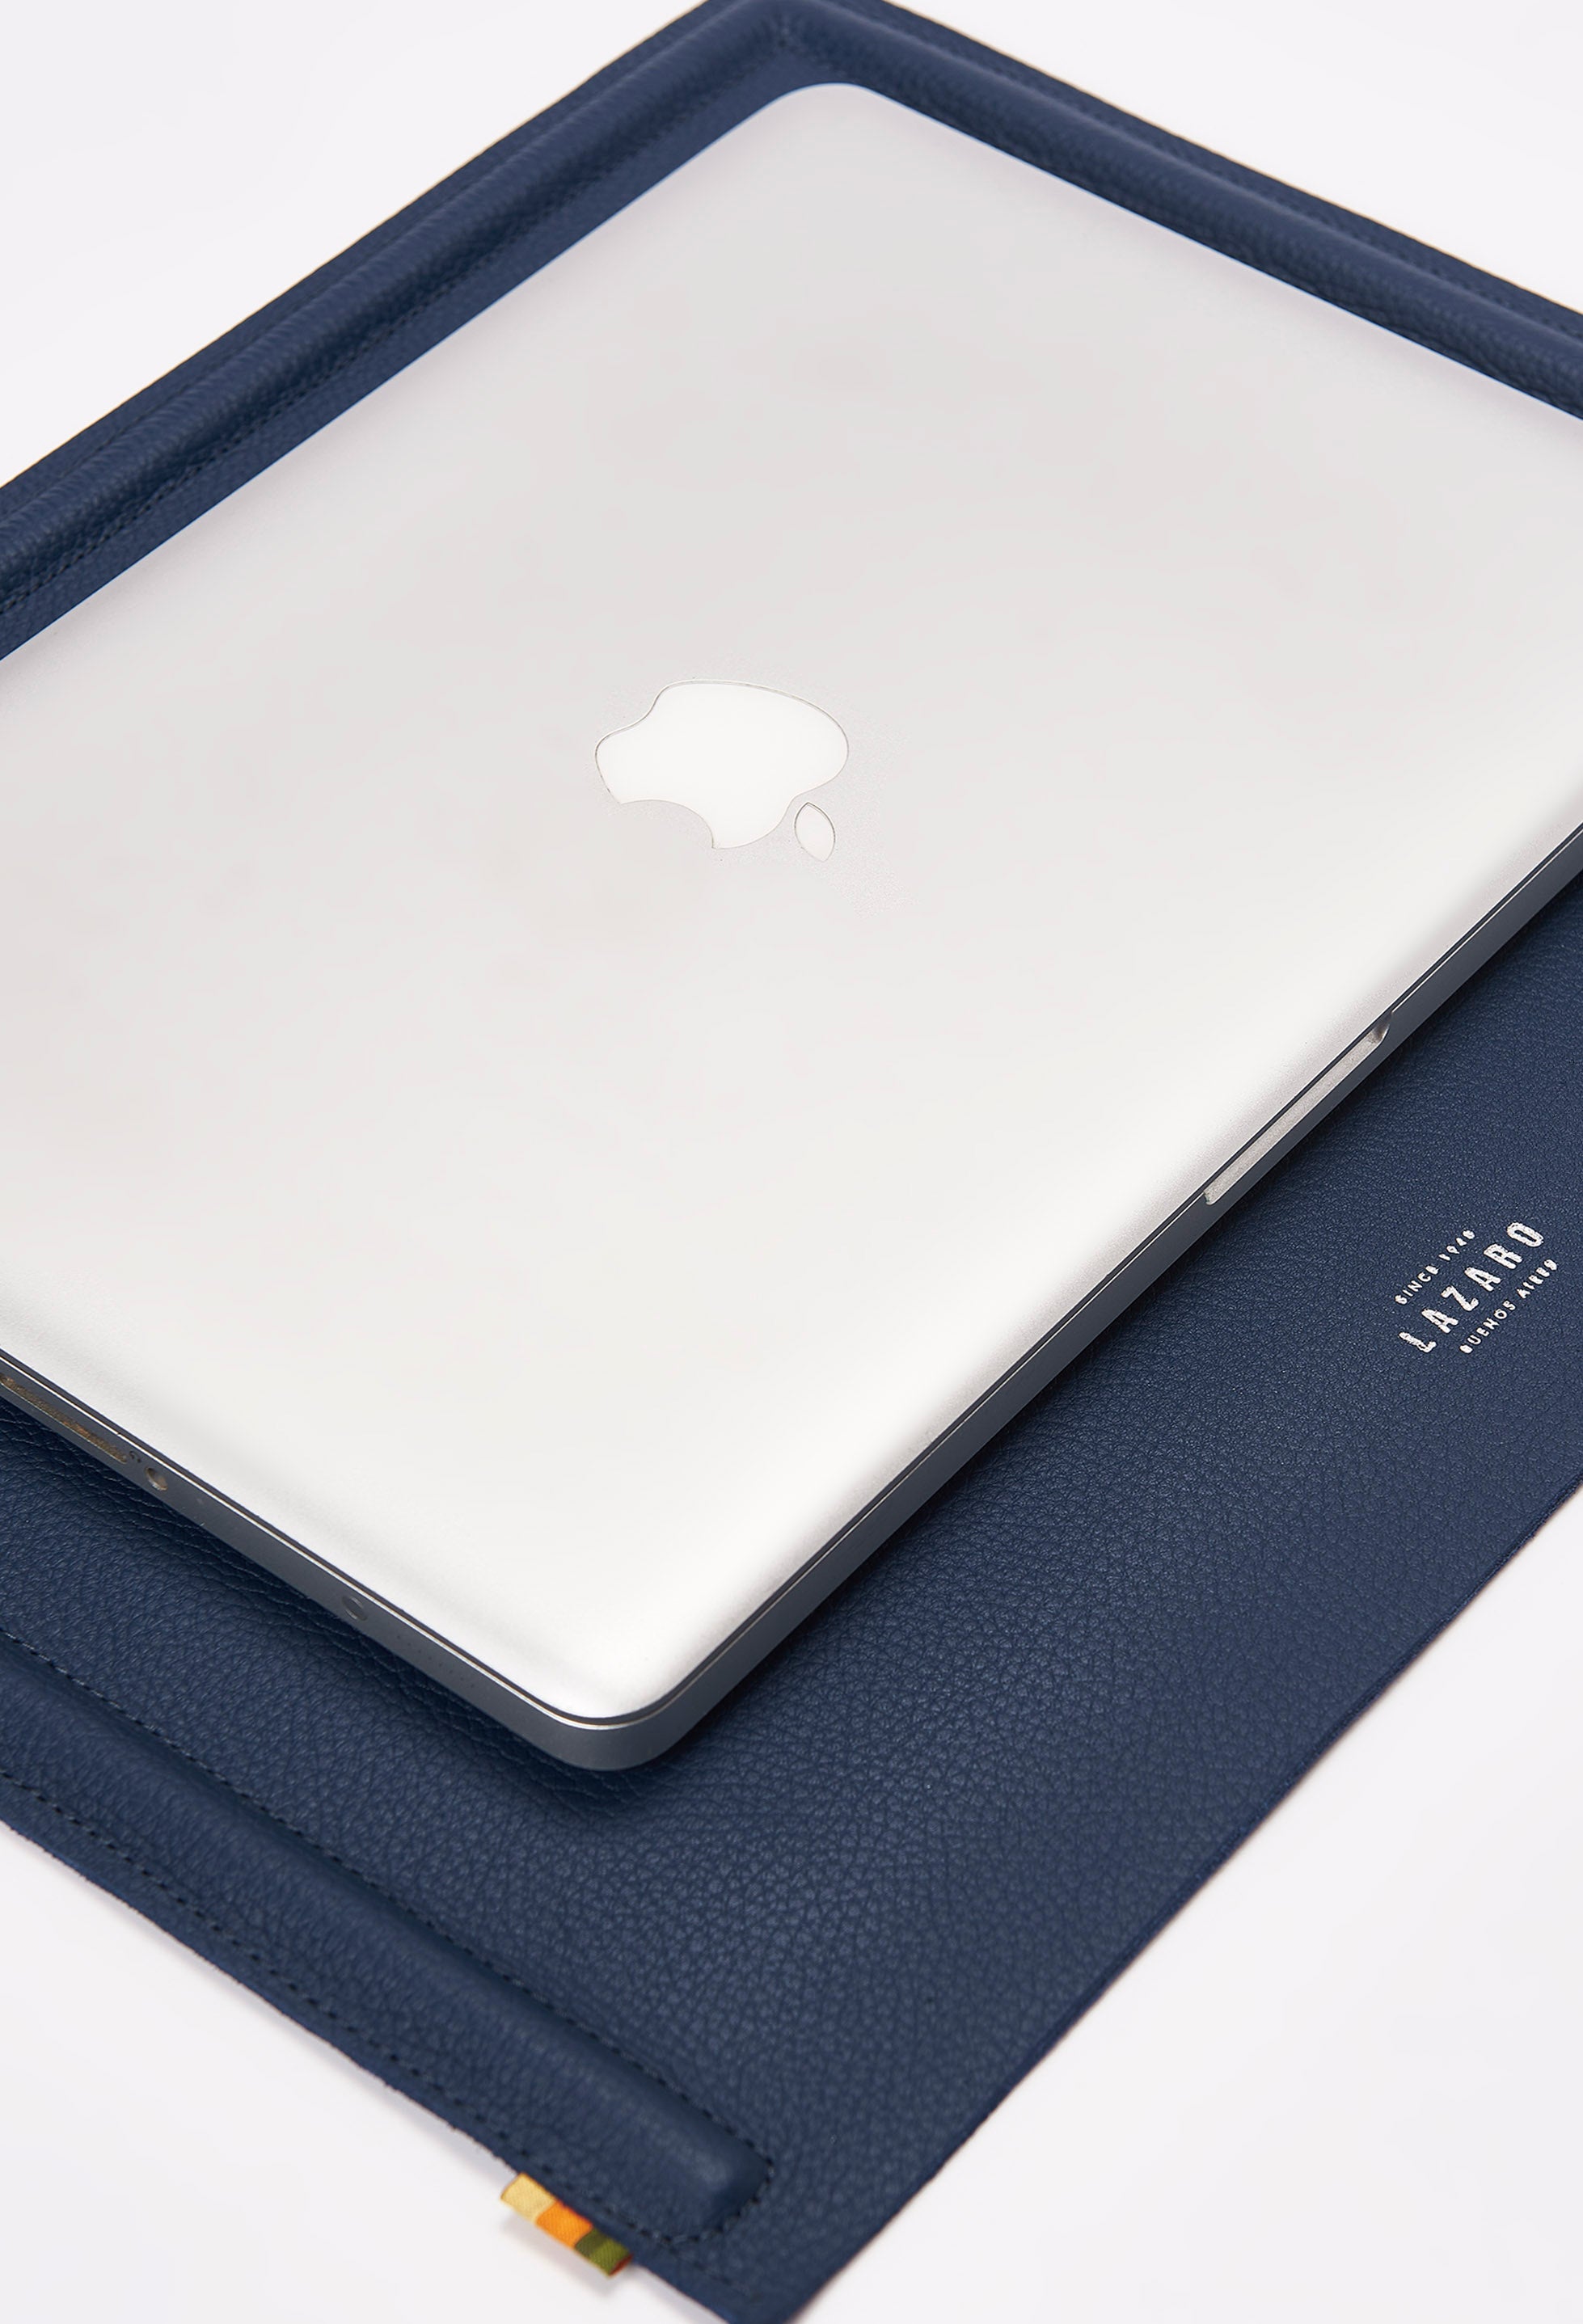 A Blue Leather Minimalist Desk Mat with embossed Lazaro logo and a computer on it.